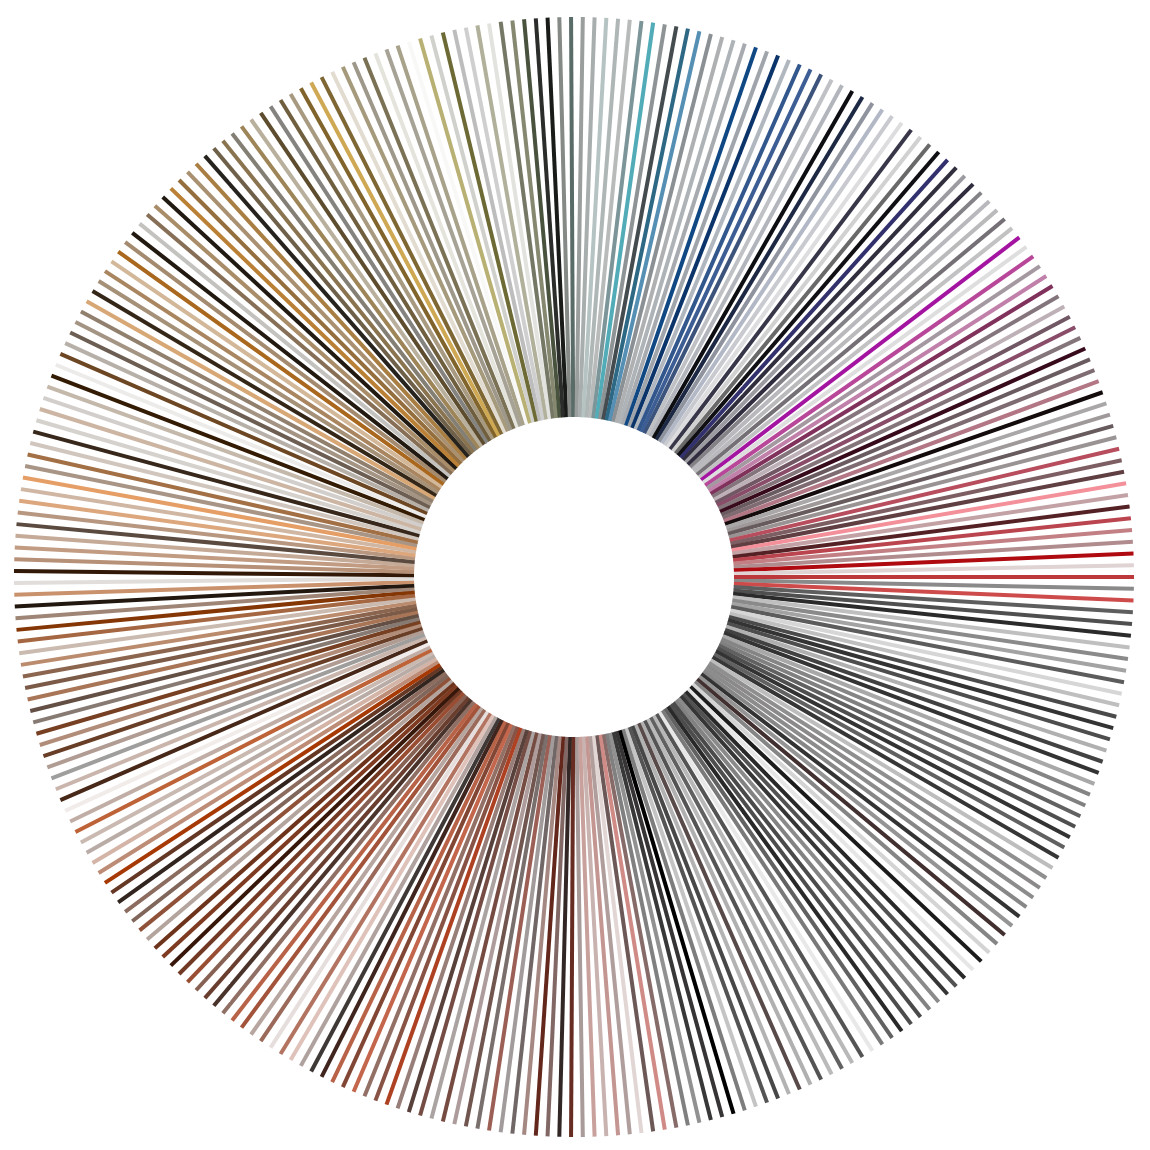 Analysing Colors From Instagram